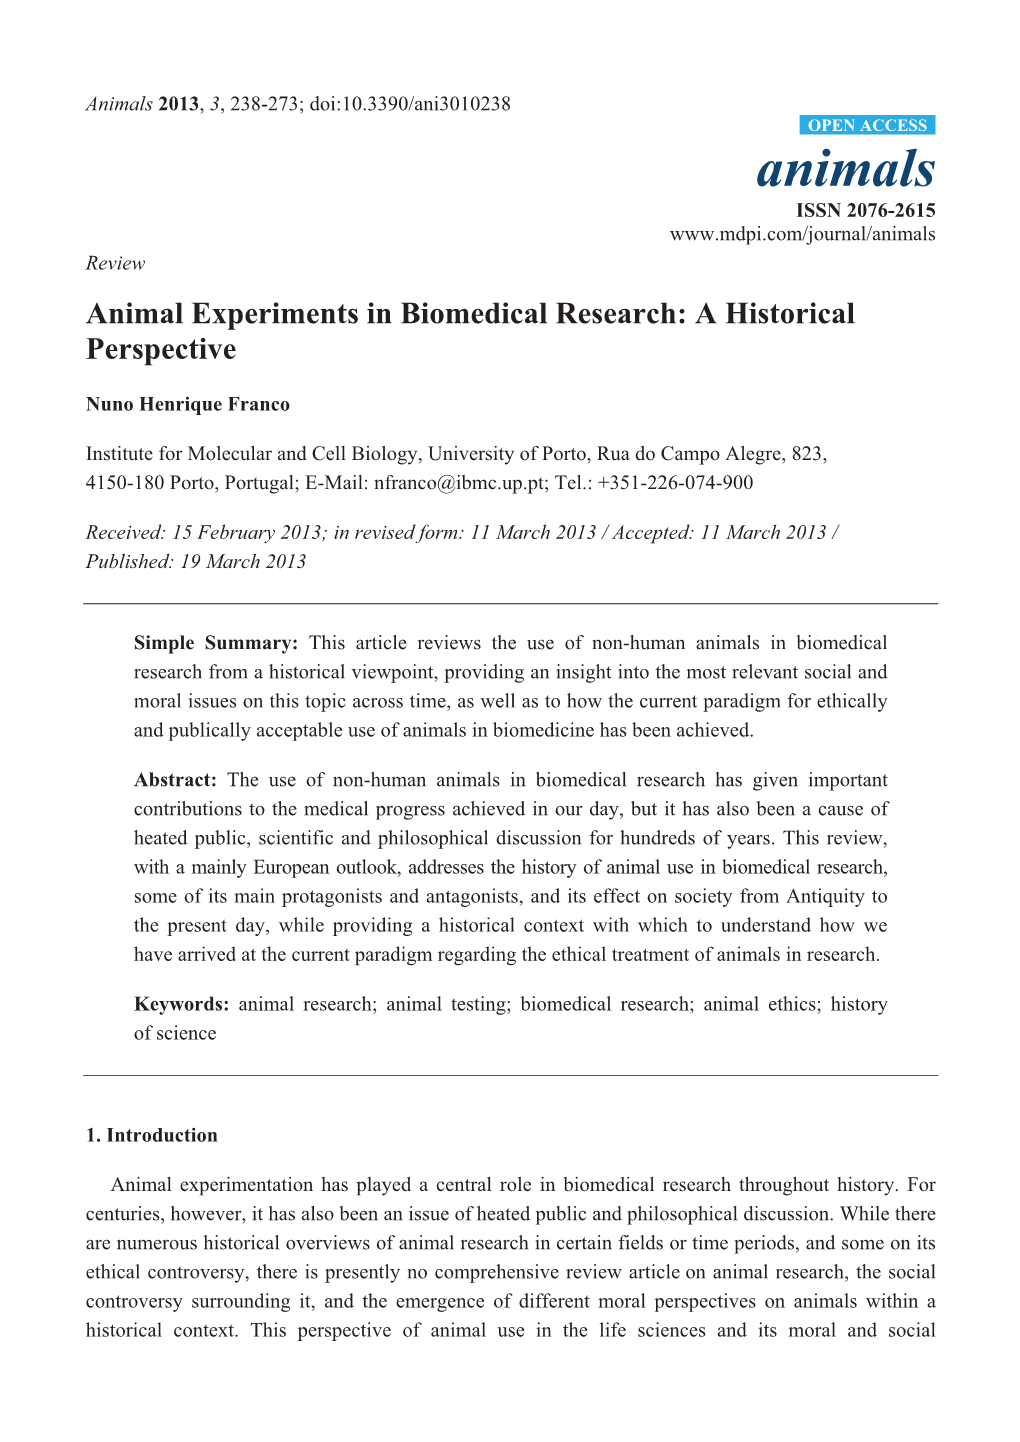 Animal Experiments in Biomedical Research: a Historical Perspective